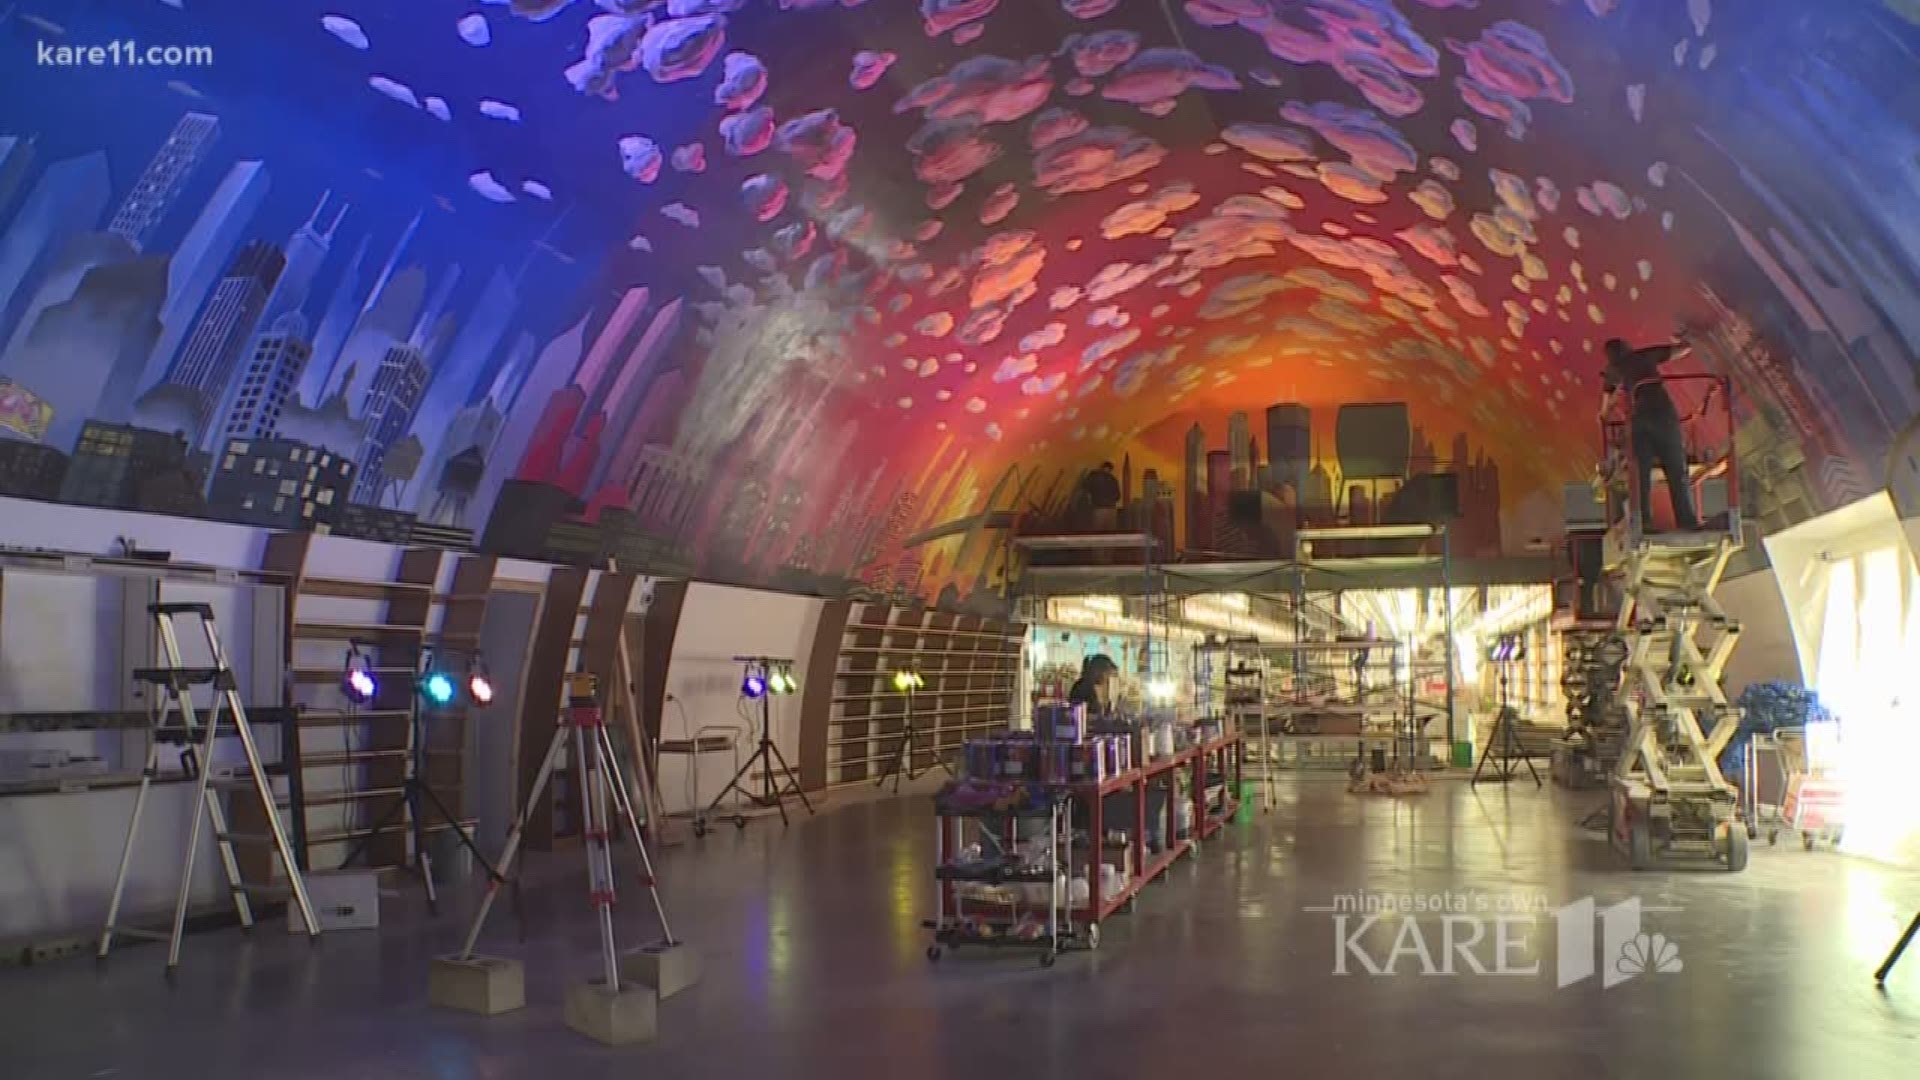 MN's Largest Candy Store re-opens with super ceiling